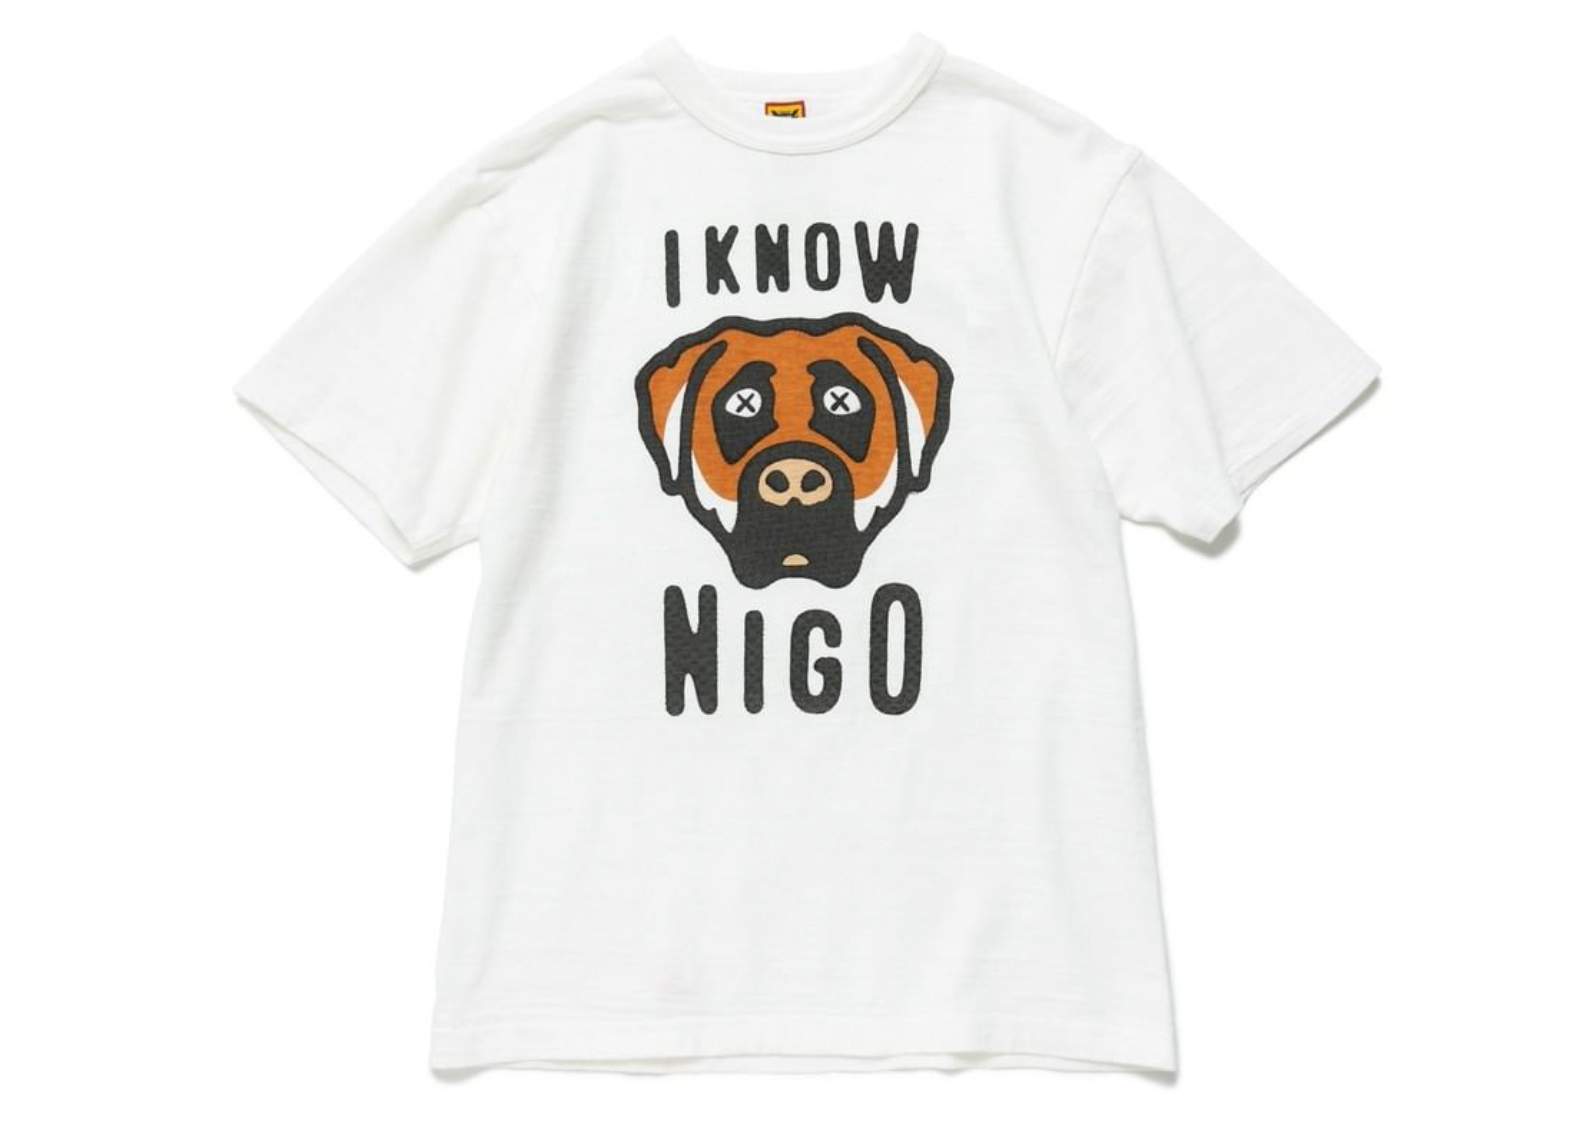 High-fashion history changes course with Virgil Abloh x Nigo for